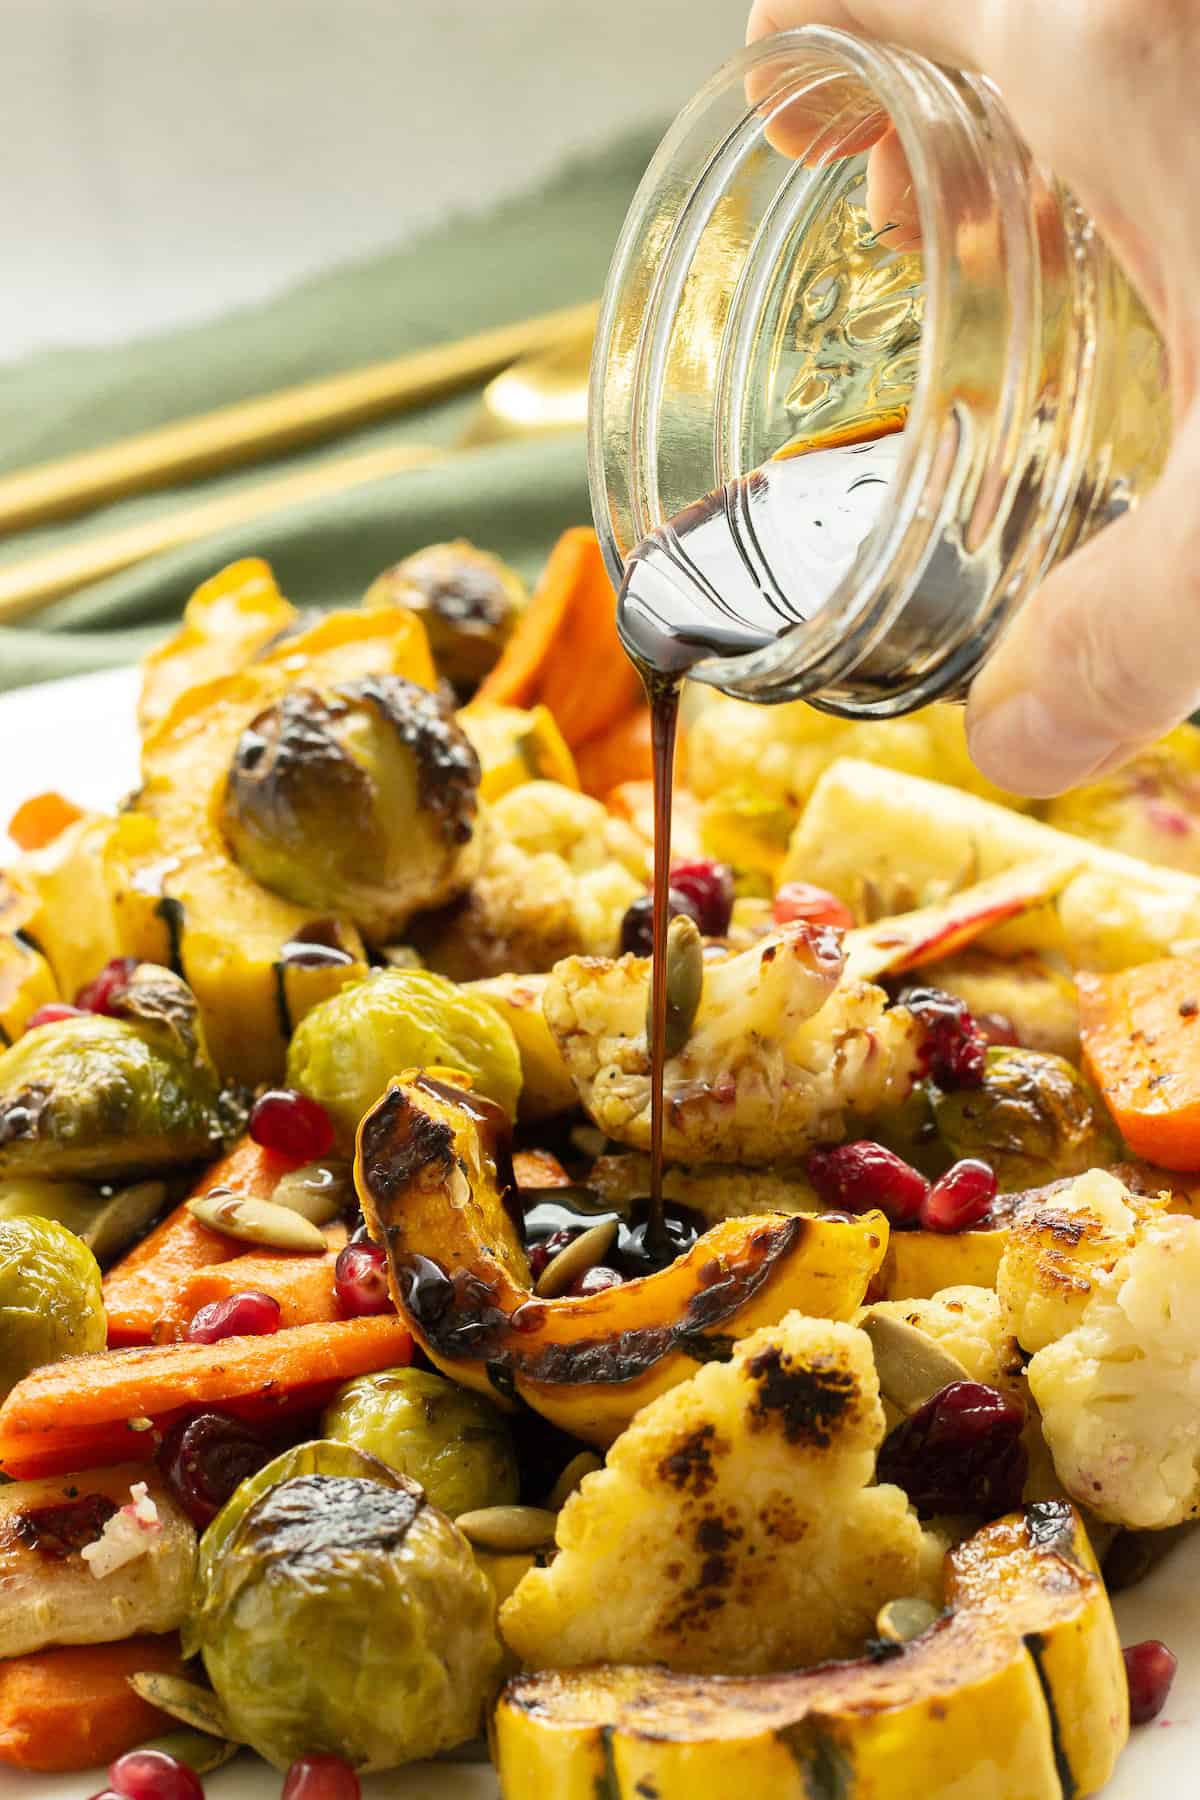 A jar of balsamic glaze being poured over a platter of roasted fall vegetables